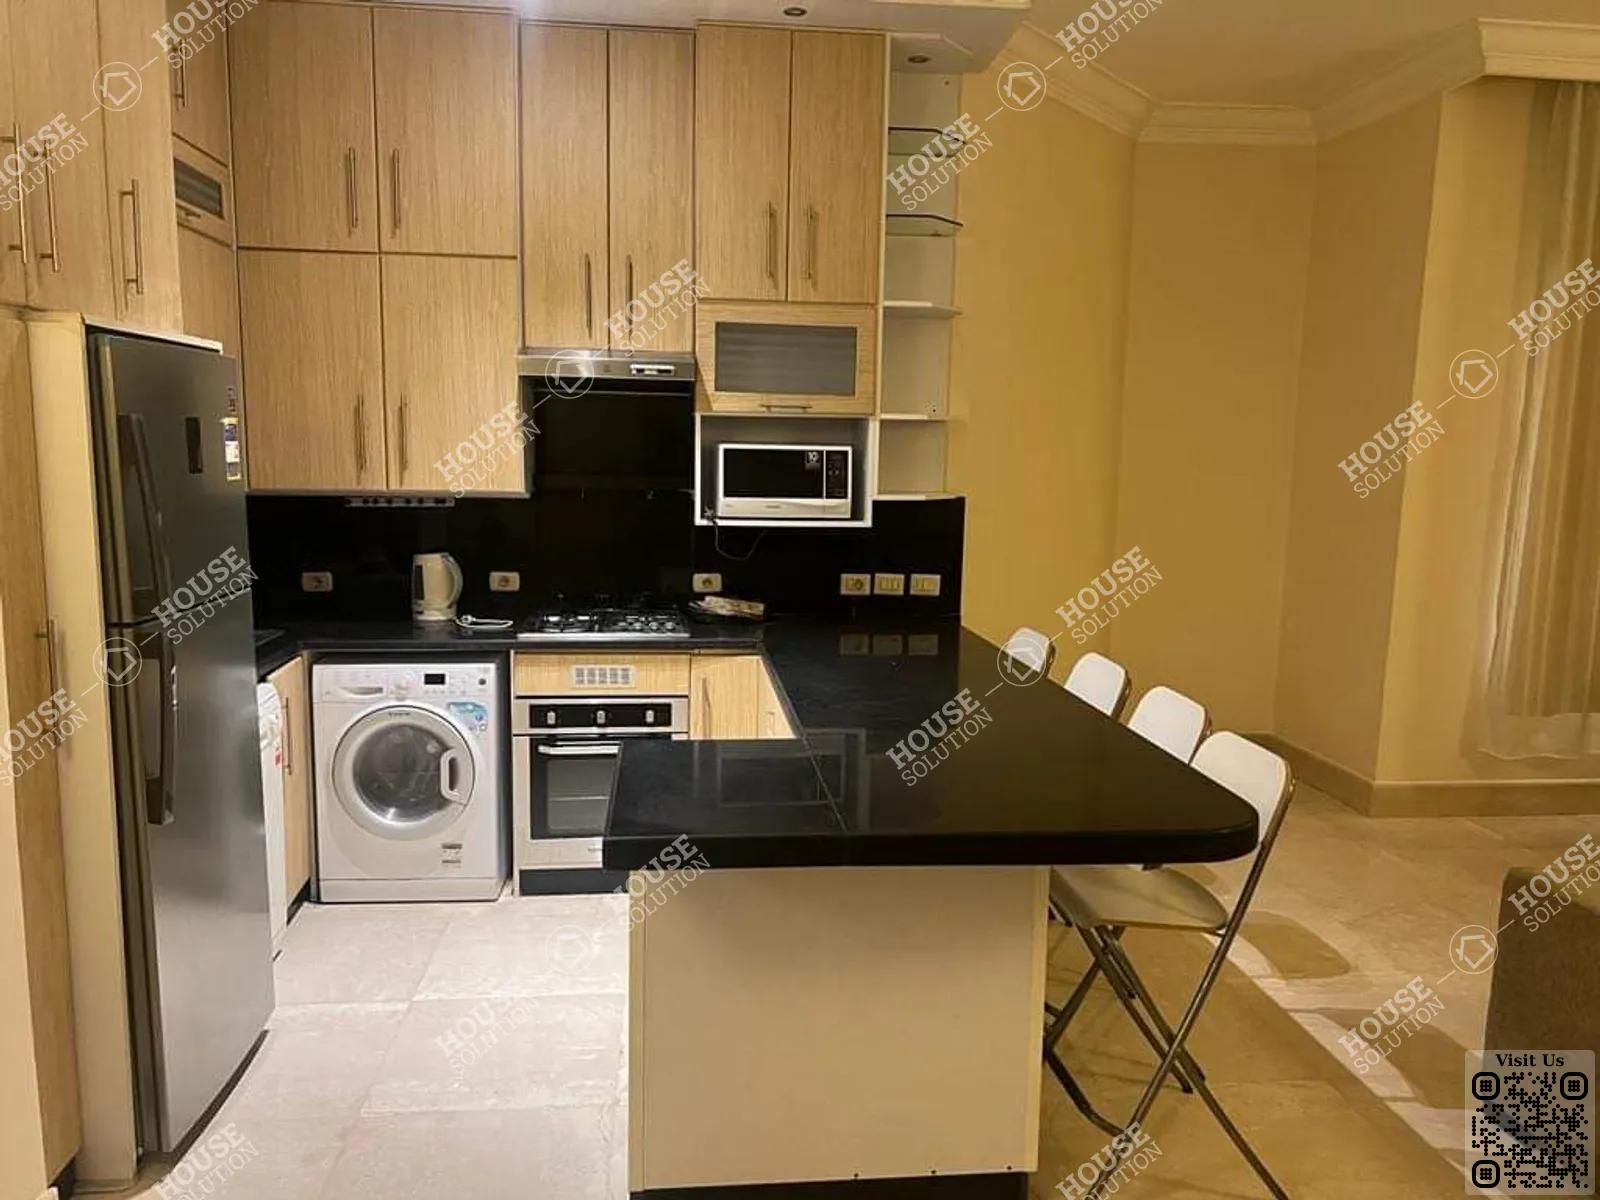 KITCHEN  @ Apartments For Rent In Maadi Maadi Sarayat Area: 130 m² consists of 2 Bedrooms 2 Bathrooms Modern furnished 5 stars #5701-1